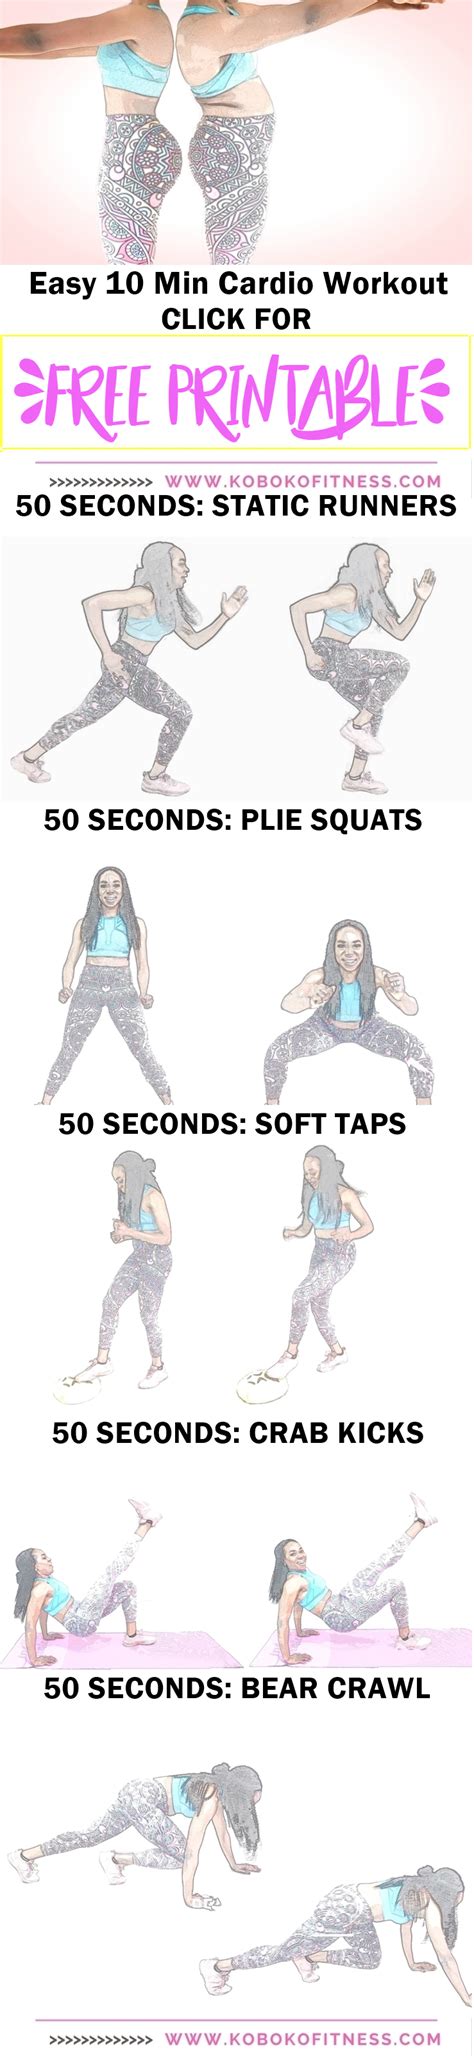 Easy 10 Min Cardio Workout To Lose Weight Free Printable